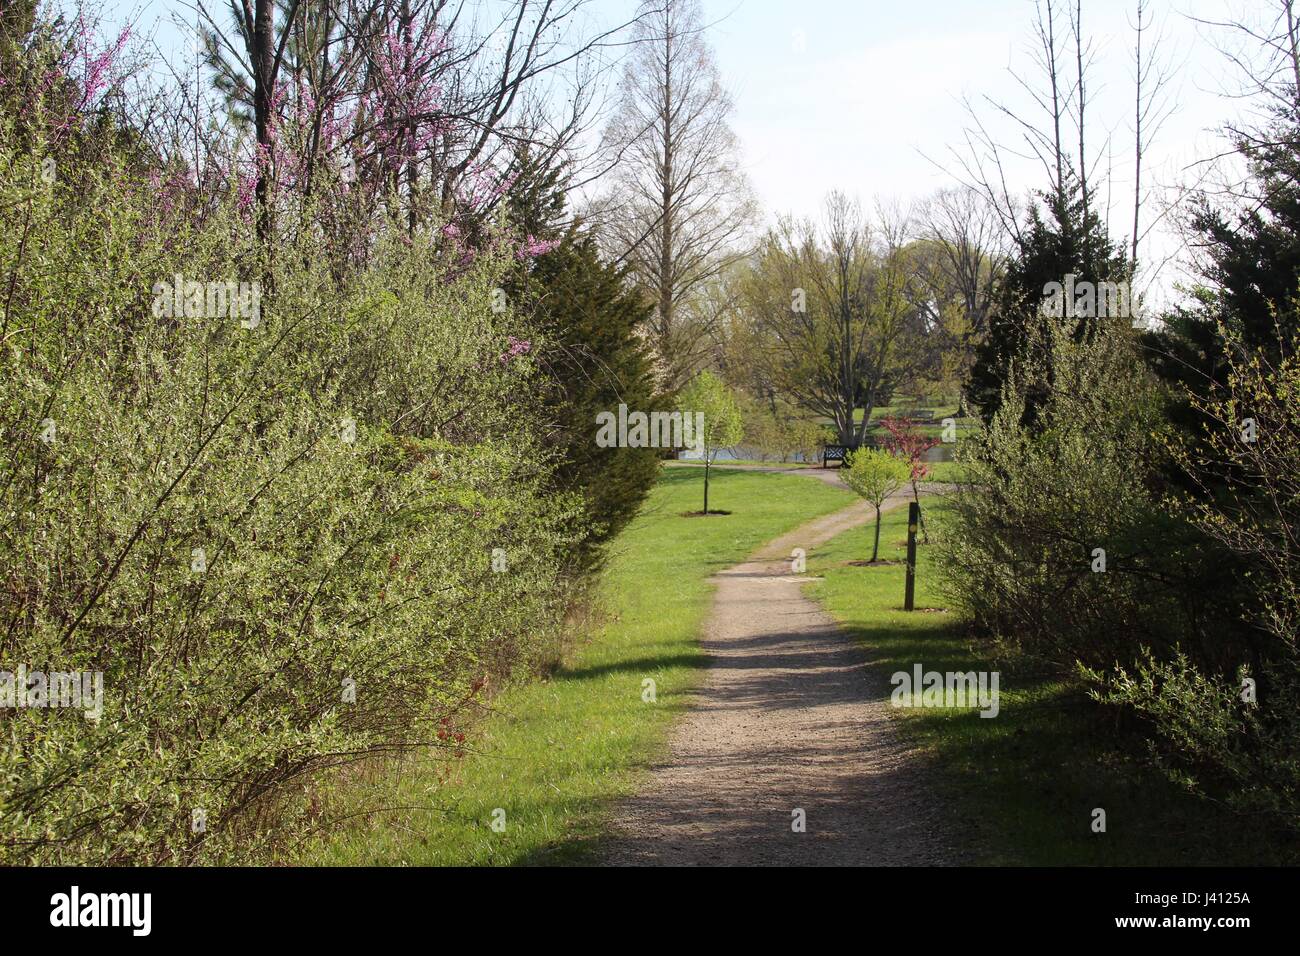 A beautiful spring day exploring the beauty of nature in the park. Stock Photo